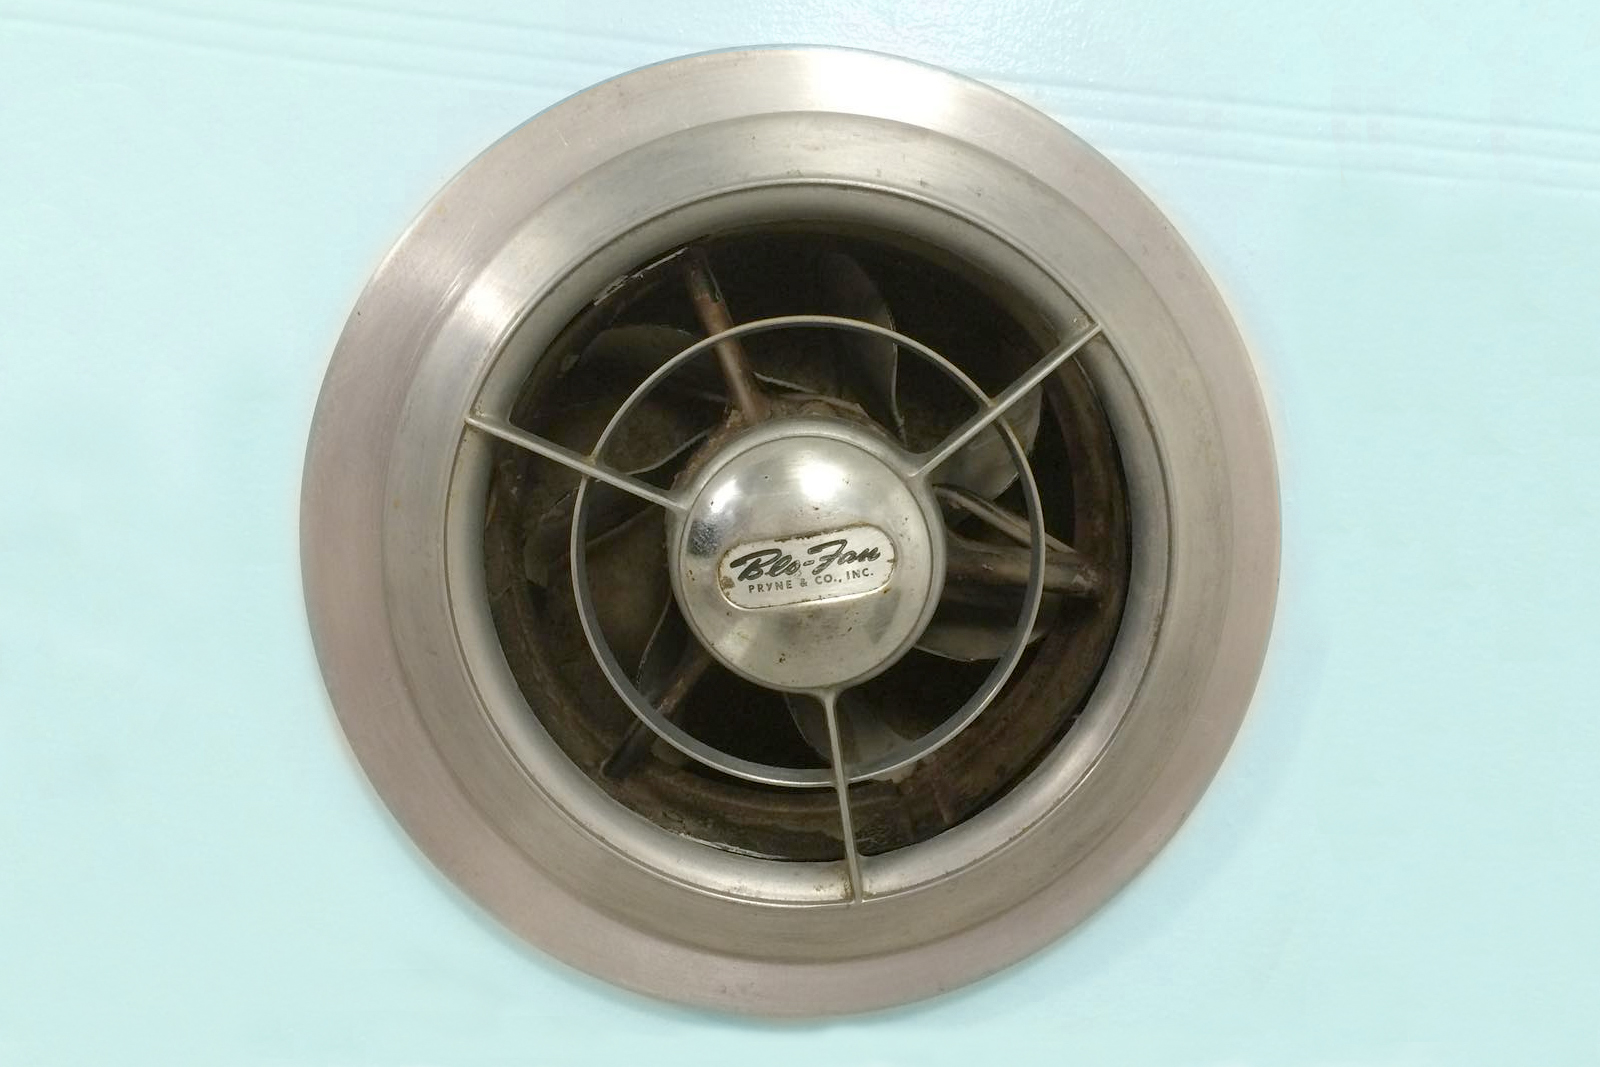 How To Install A Bathroom Exhaust Fan